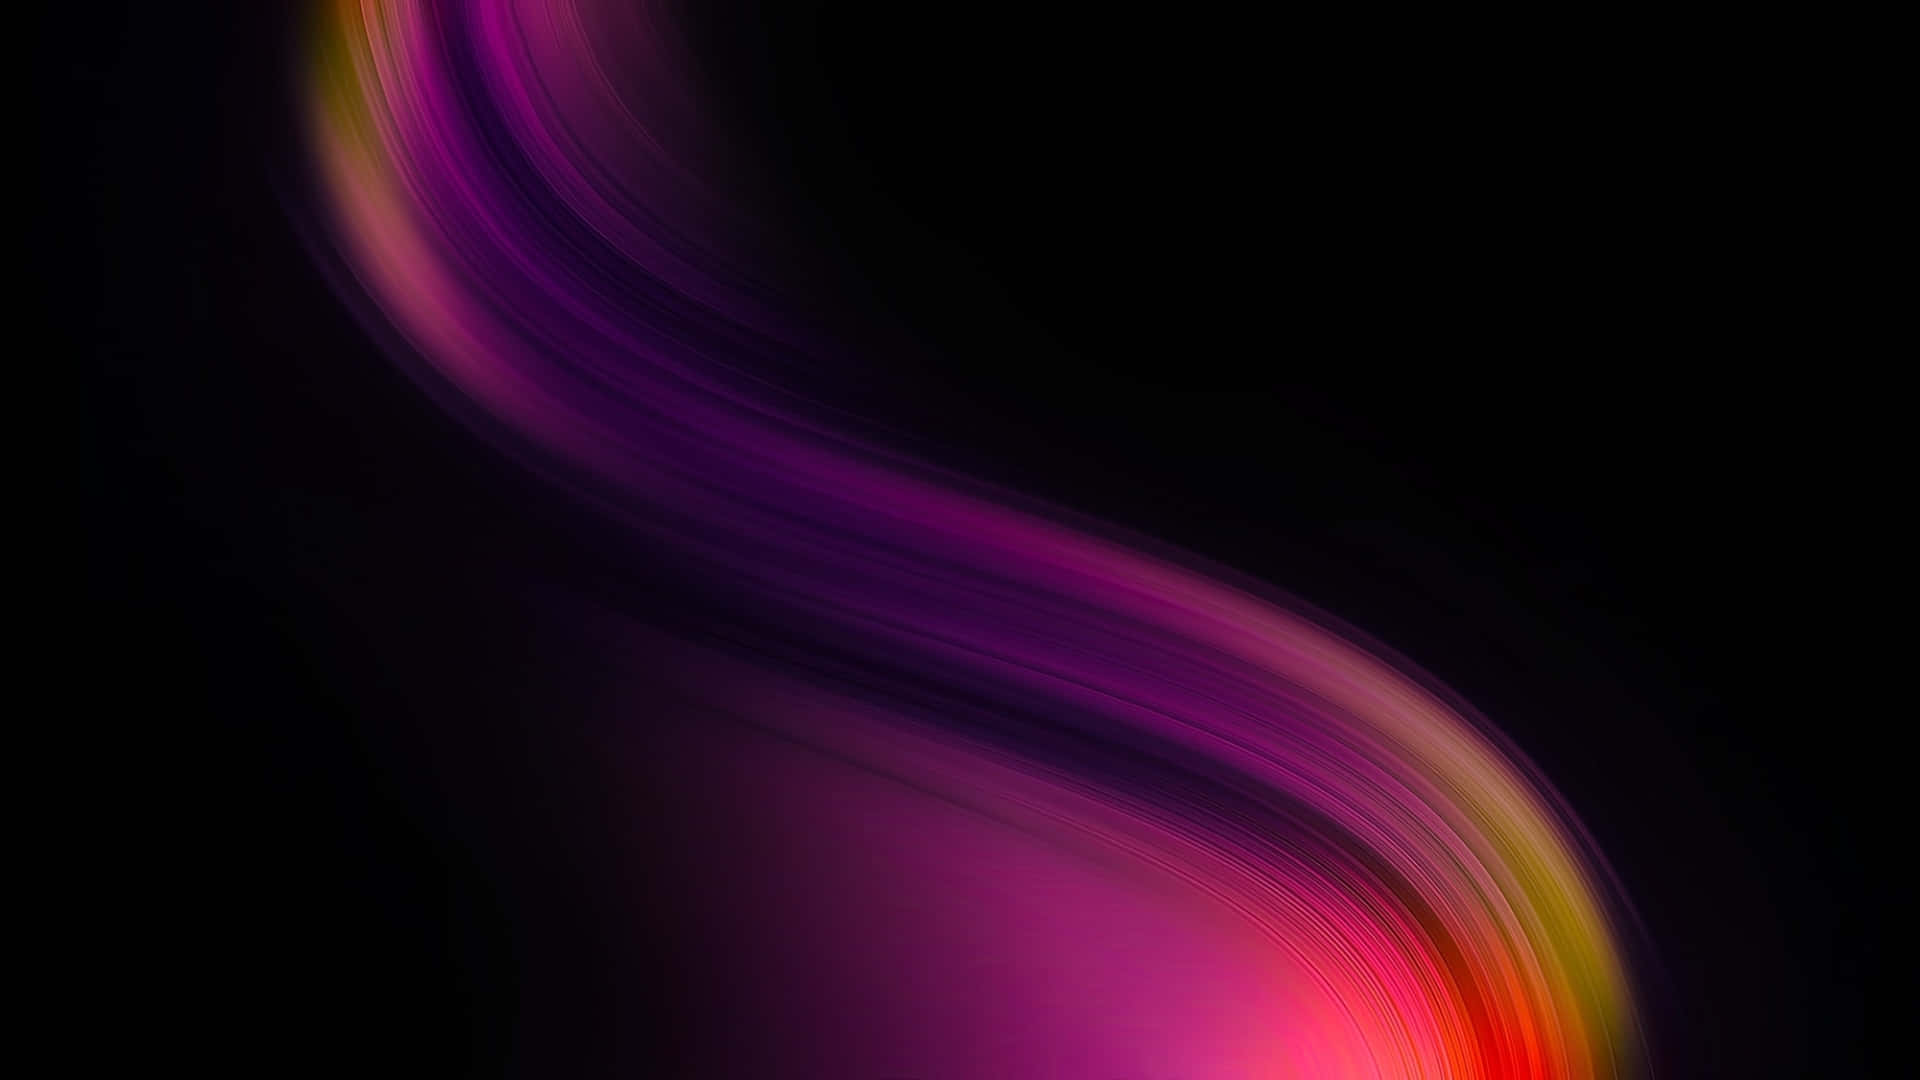 A Purple And Yellow Wave Background